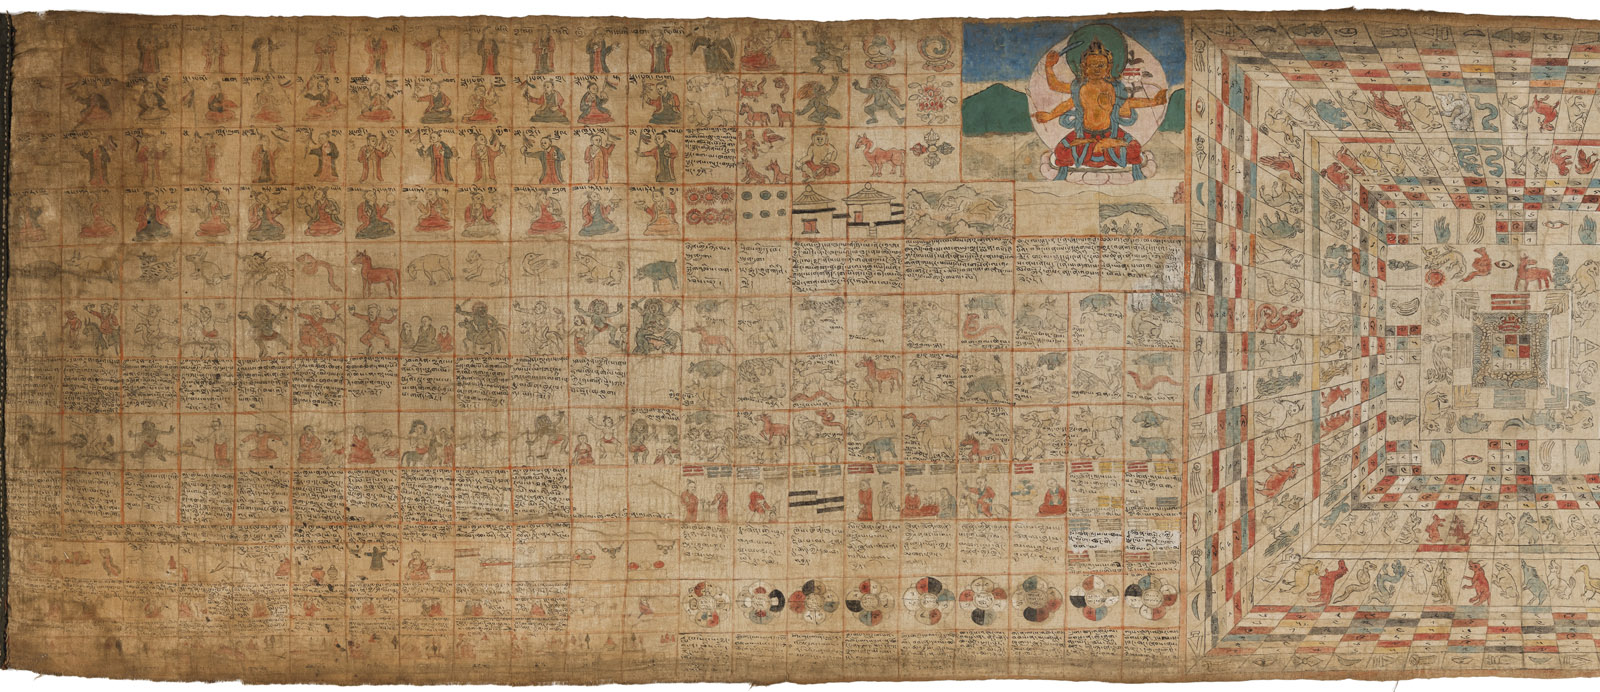 A RARE ASTROLOGICAL HANDSCROLL FOR DETERMING KARMIC FAVORABLE AND UNFAVORABLE DATES - Image 2 of 4